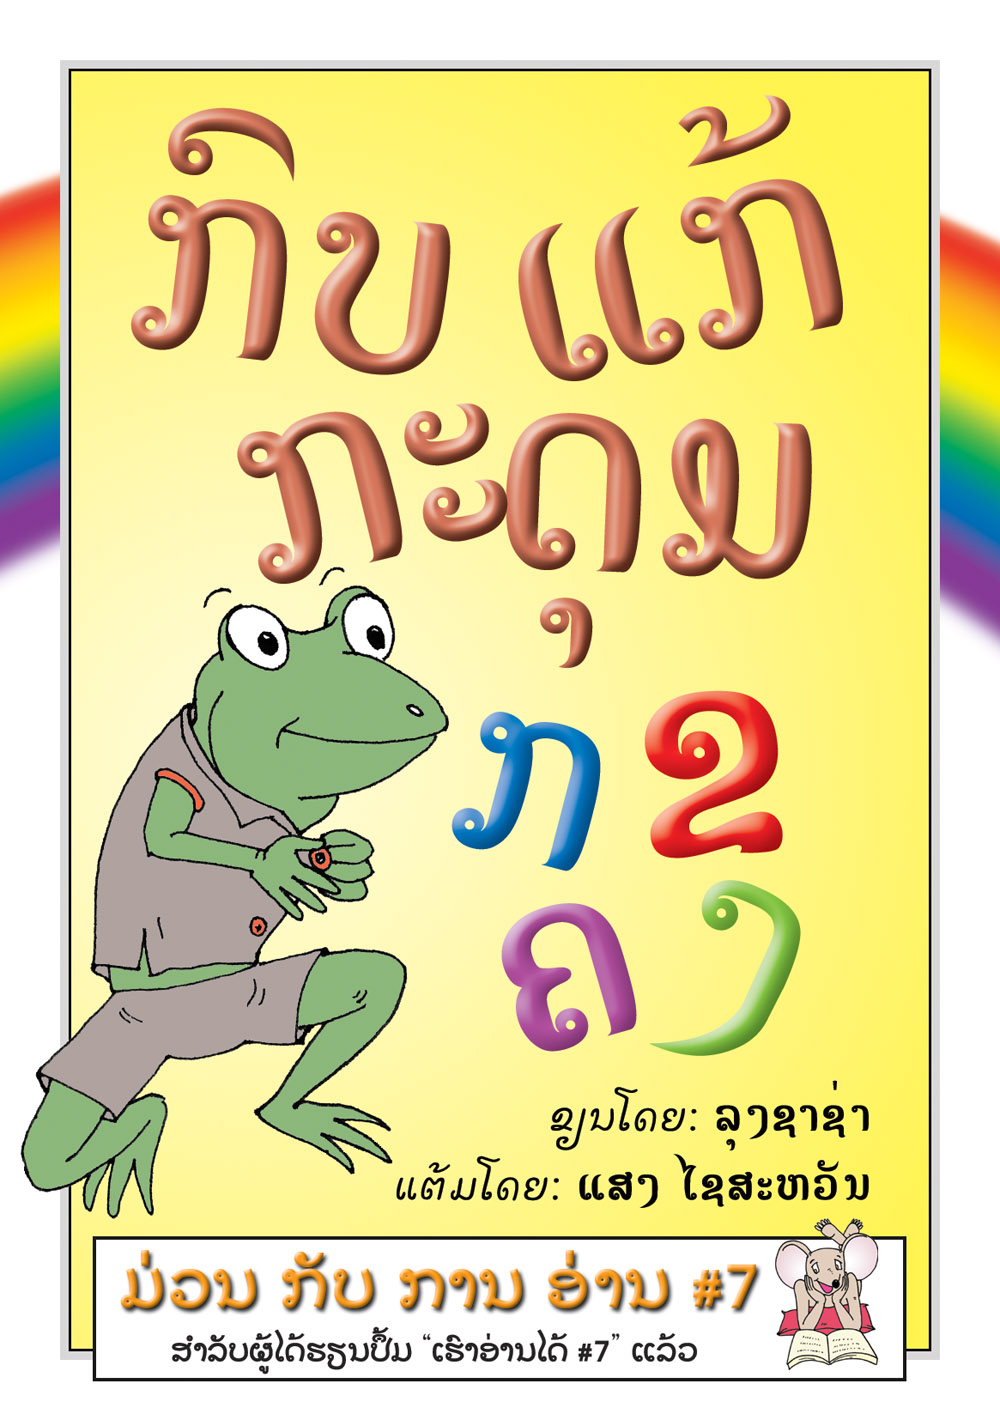 The Frog Unbuttons its Shirt large book cover, published in Lao language